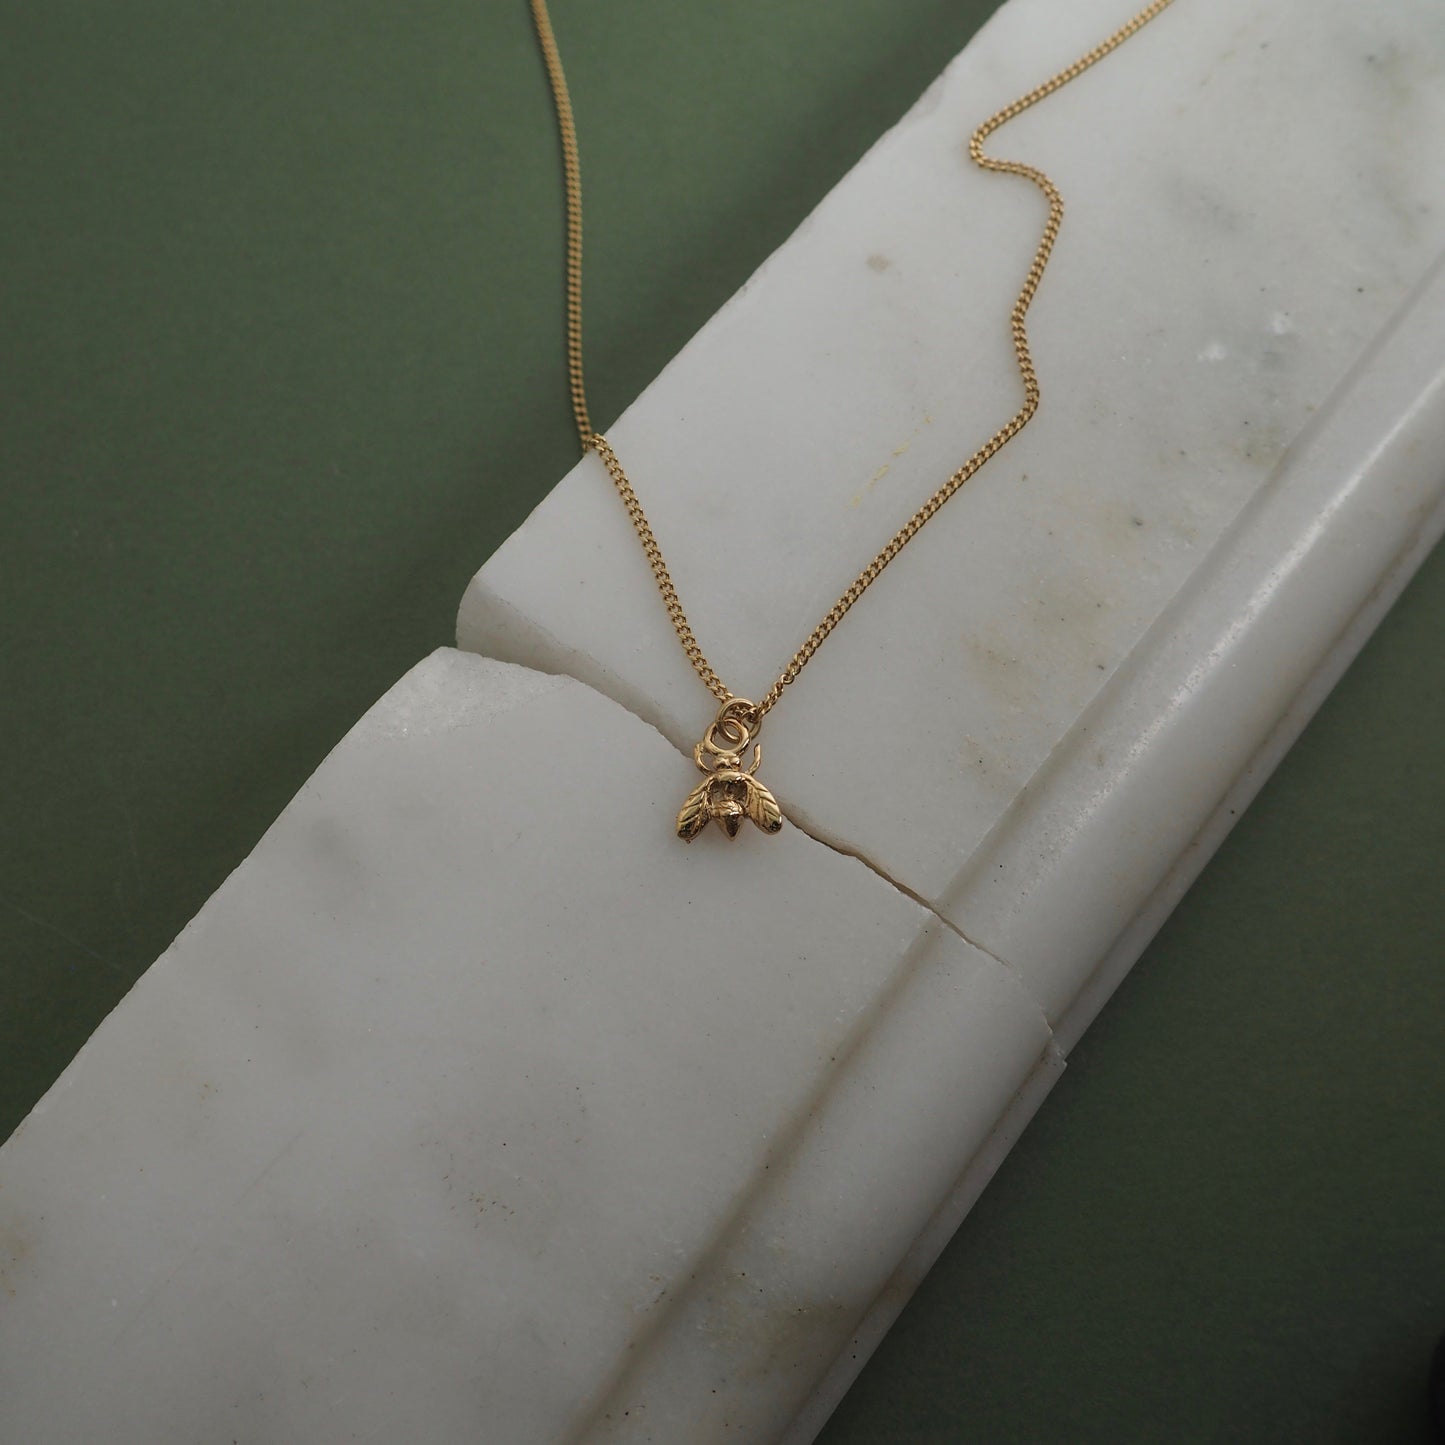 9ct Gold Little Fly Necklace by Yasmin Everley